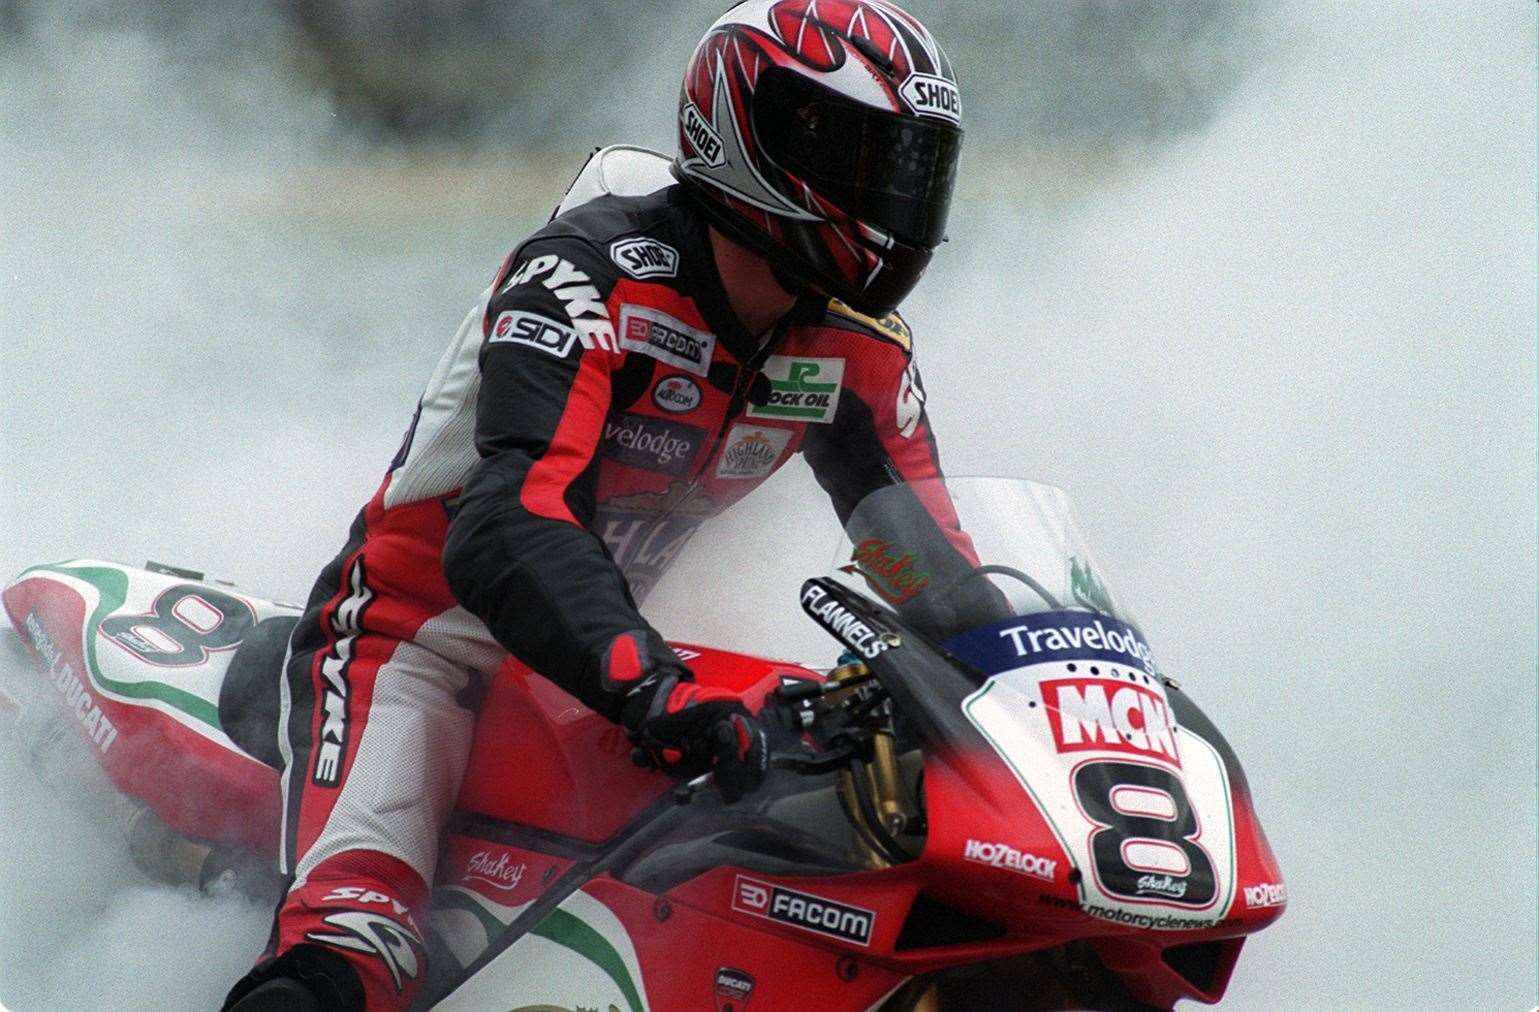 Surrounded by tyre smoke, Shane 'Shakey' Byrne performs a doughnut in front of his home fans in 2002. Picture: Andy Payton